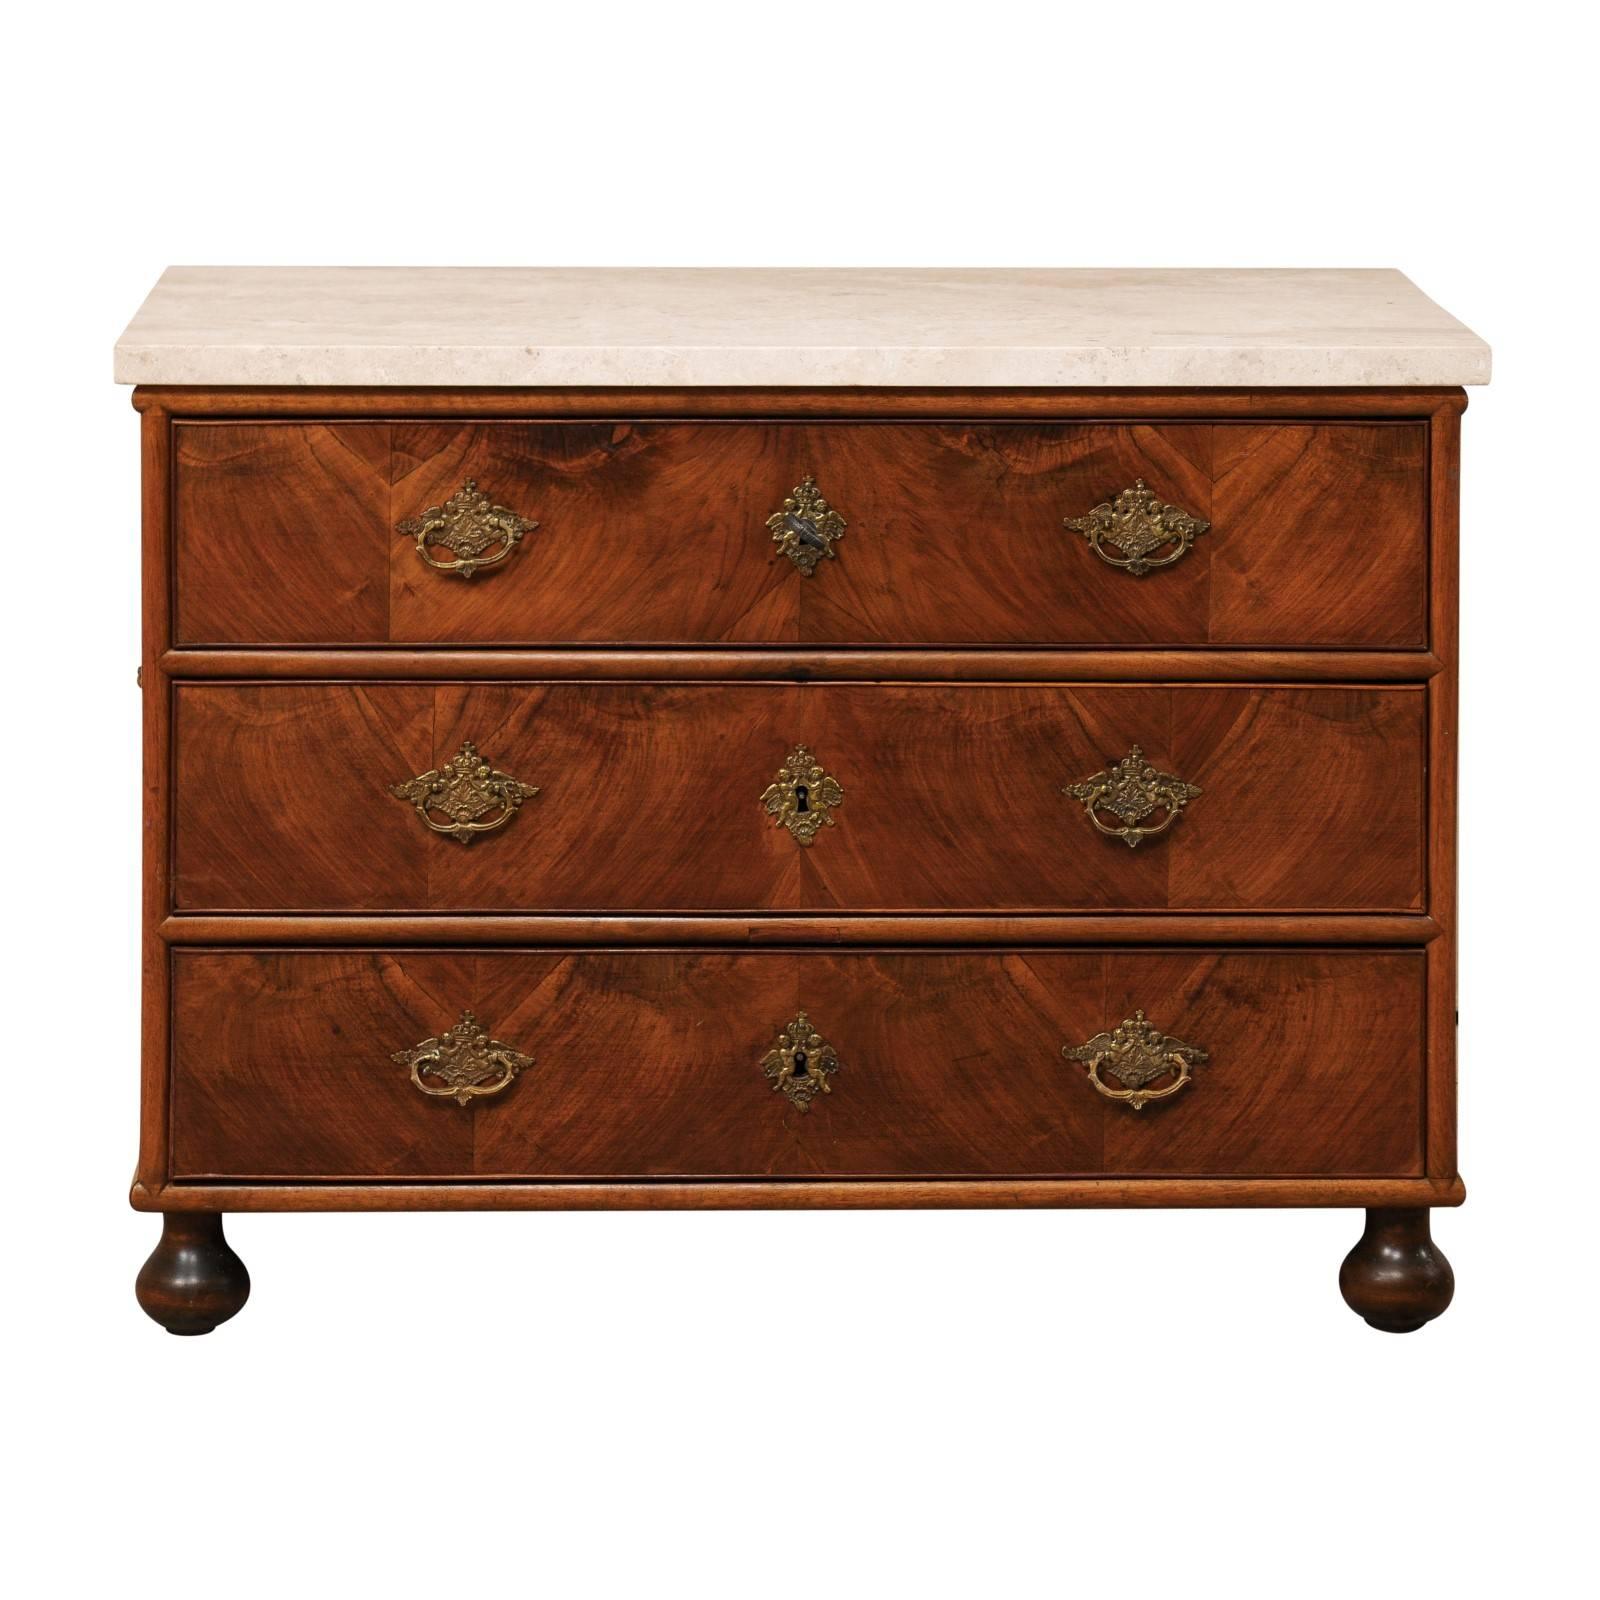 Swedish, 18th Century Wood Three-Drawer Chest with Marble Top & Rococo Hardware